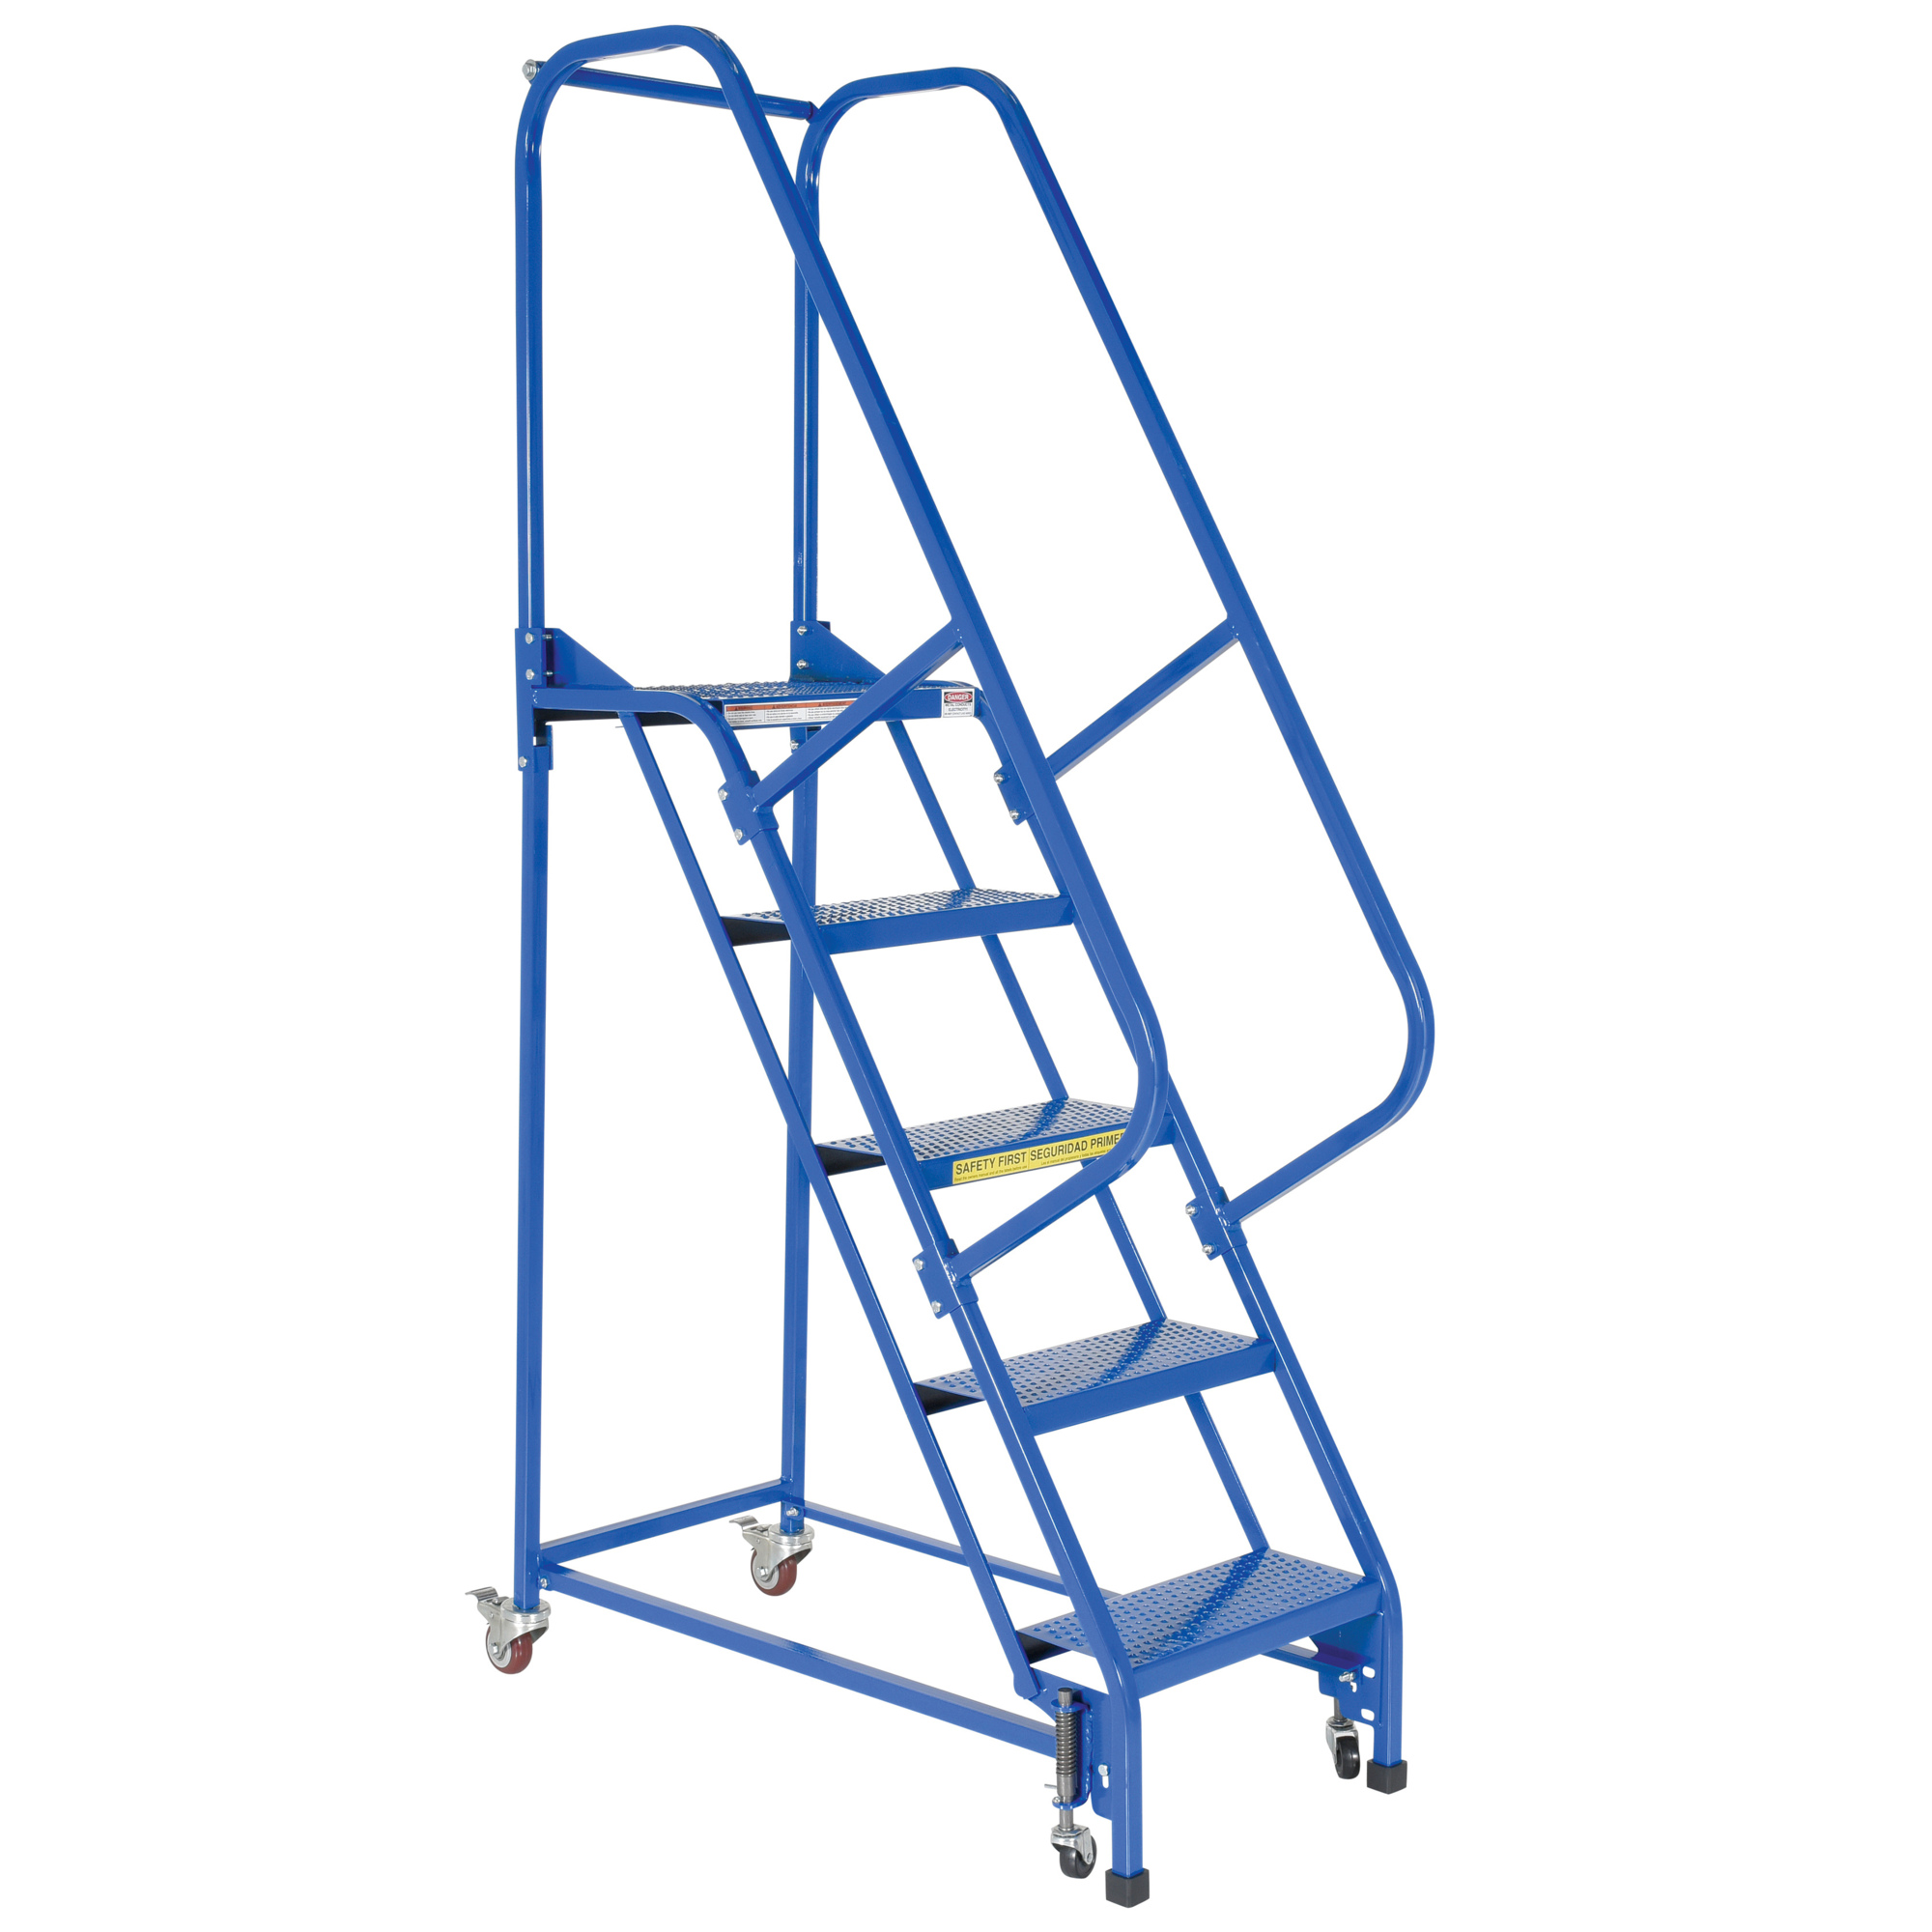 Vestil, 5 Step perforated warehouse ladder, Overall Height 80 in, Steps 5 Material Steel, Model LAD-PW-18-5-P